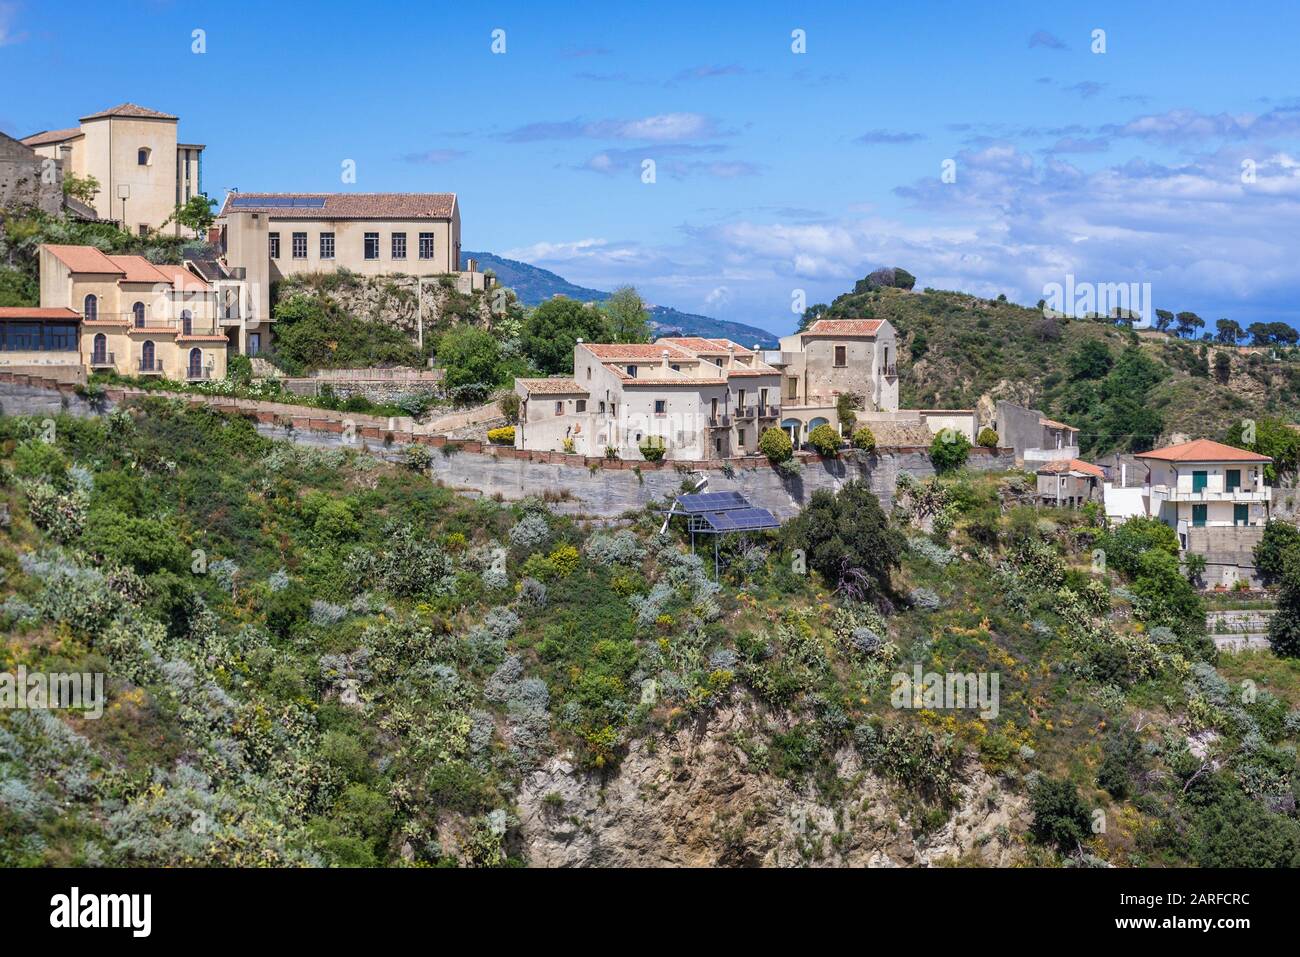 Buildings in Savoca comune, famous for filming locations of The Godfather movies on Sicily Island in Italy. Stock Photo